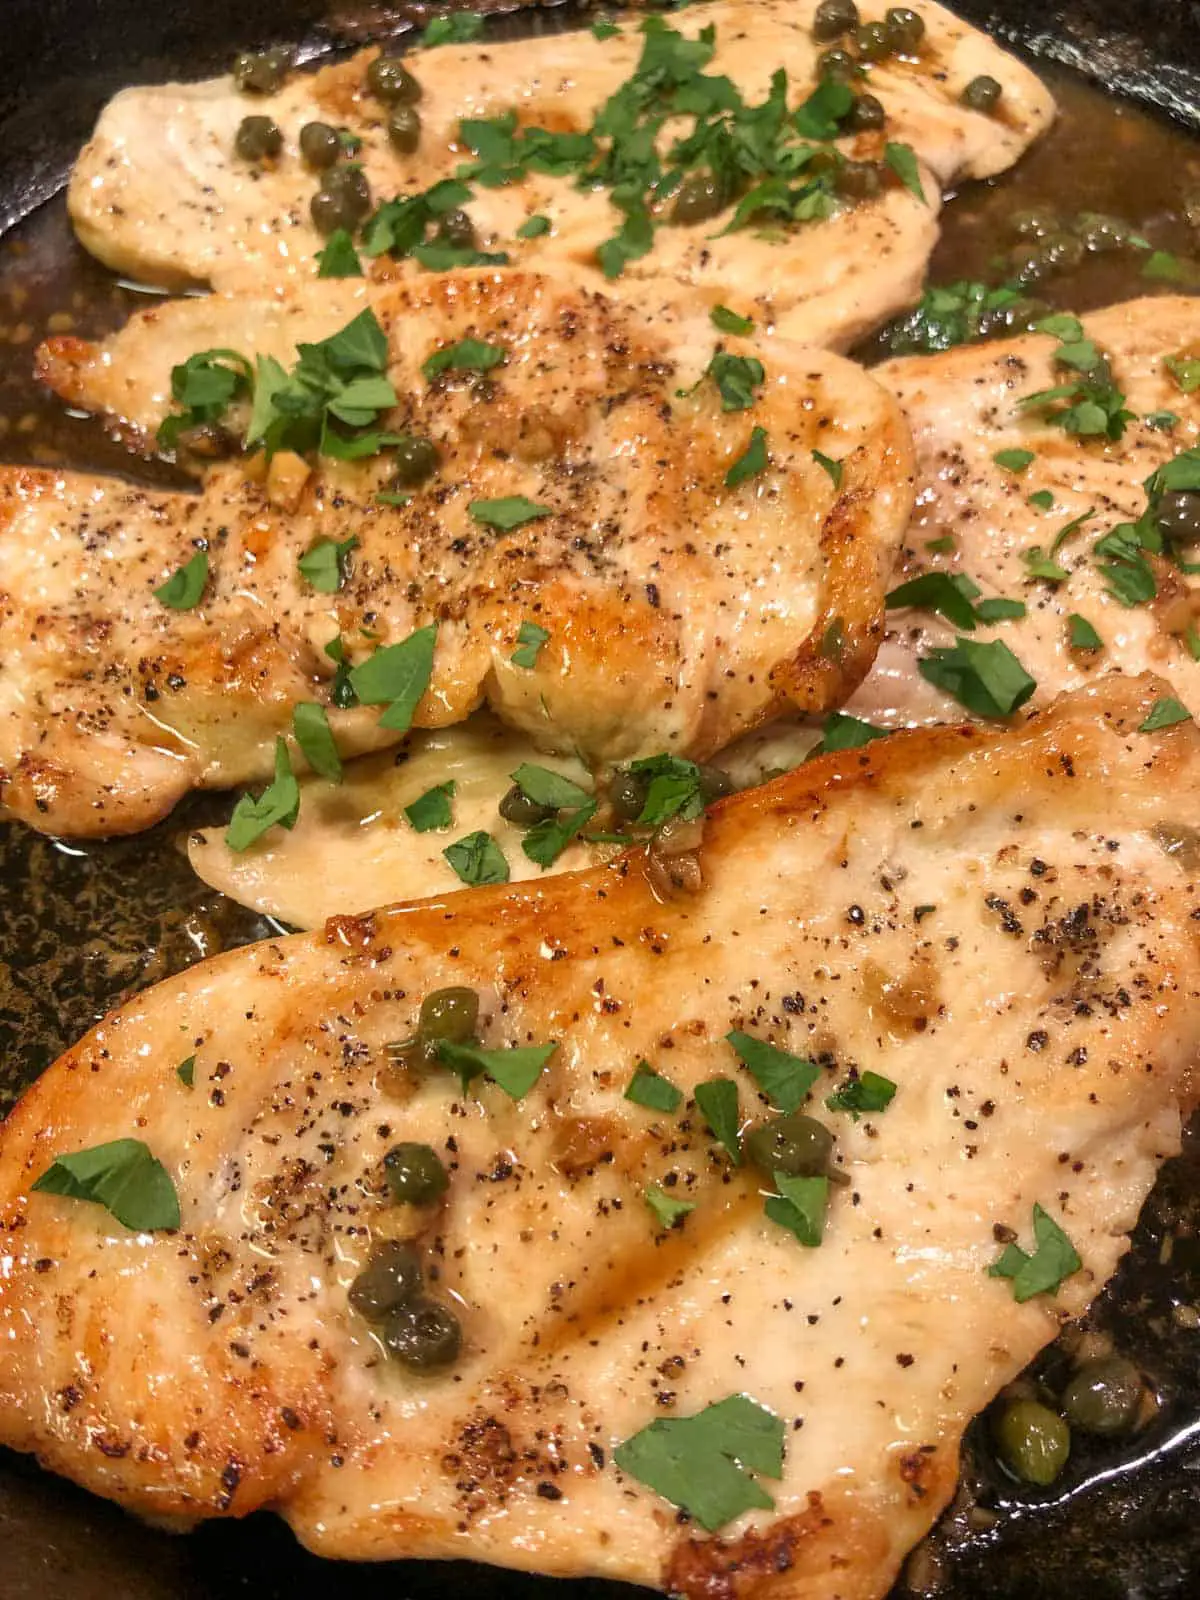 Seasoned thinly sliced chicken breast cooked in a lemon and caper sauce garnished with Italian parsley.